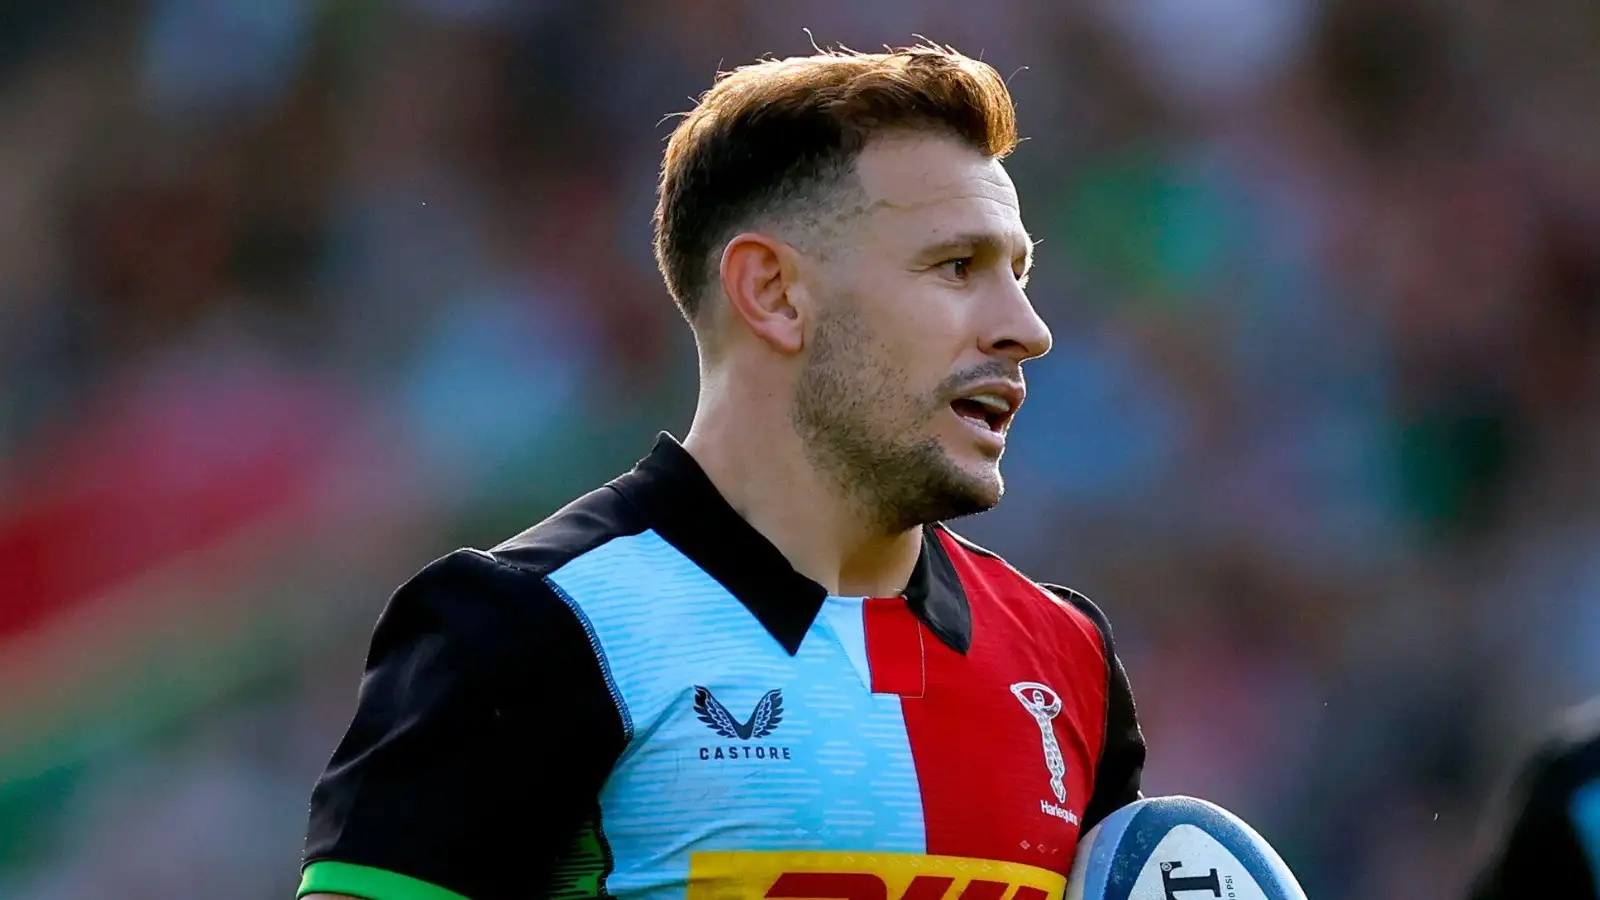 Danny Care has put pen to paper on to contract extension with Harlequins ahead of the 2023/24 season.  Care joined Harlequins from Leeds in 2006 and has become one of the club's most capped players in their history. 